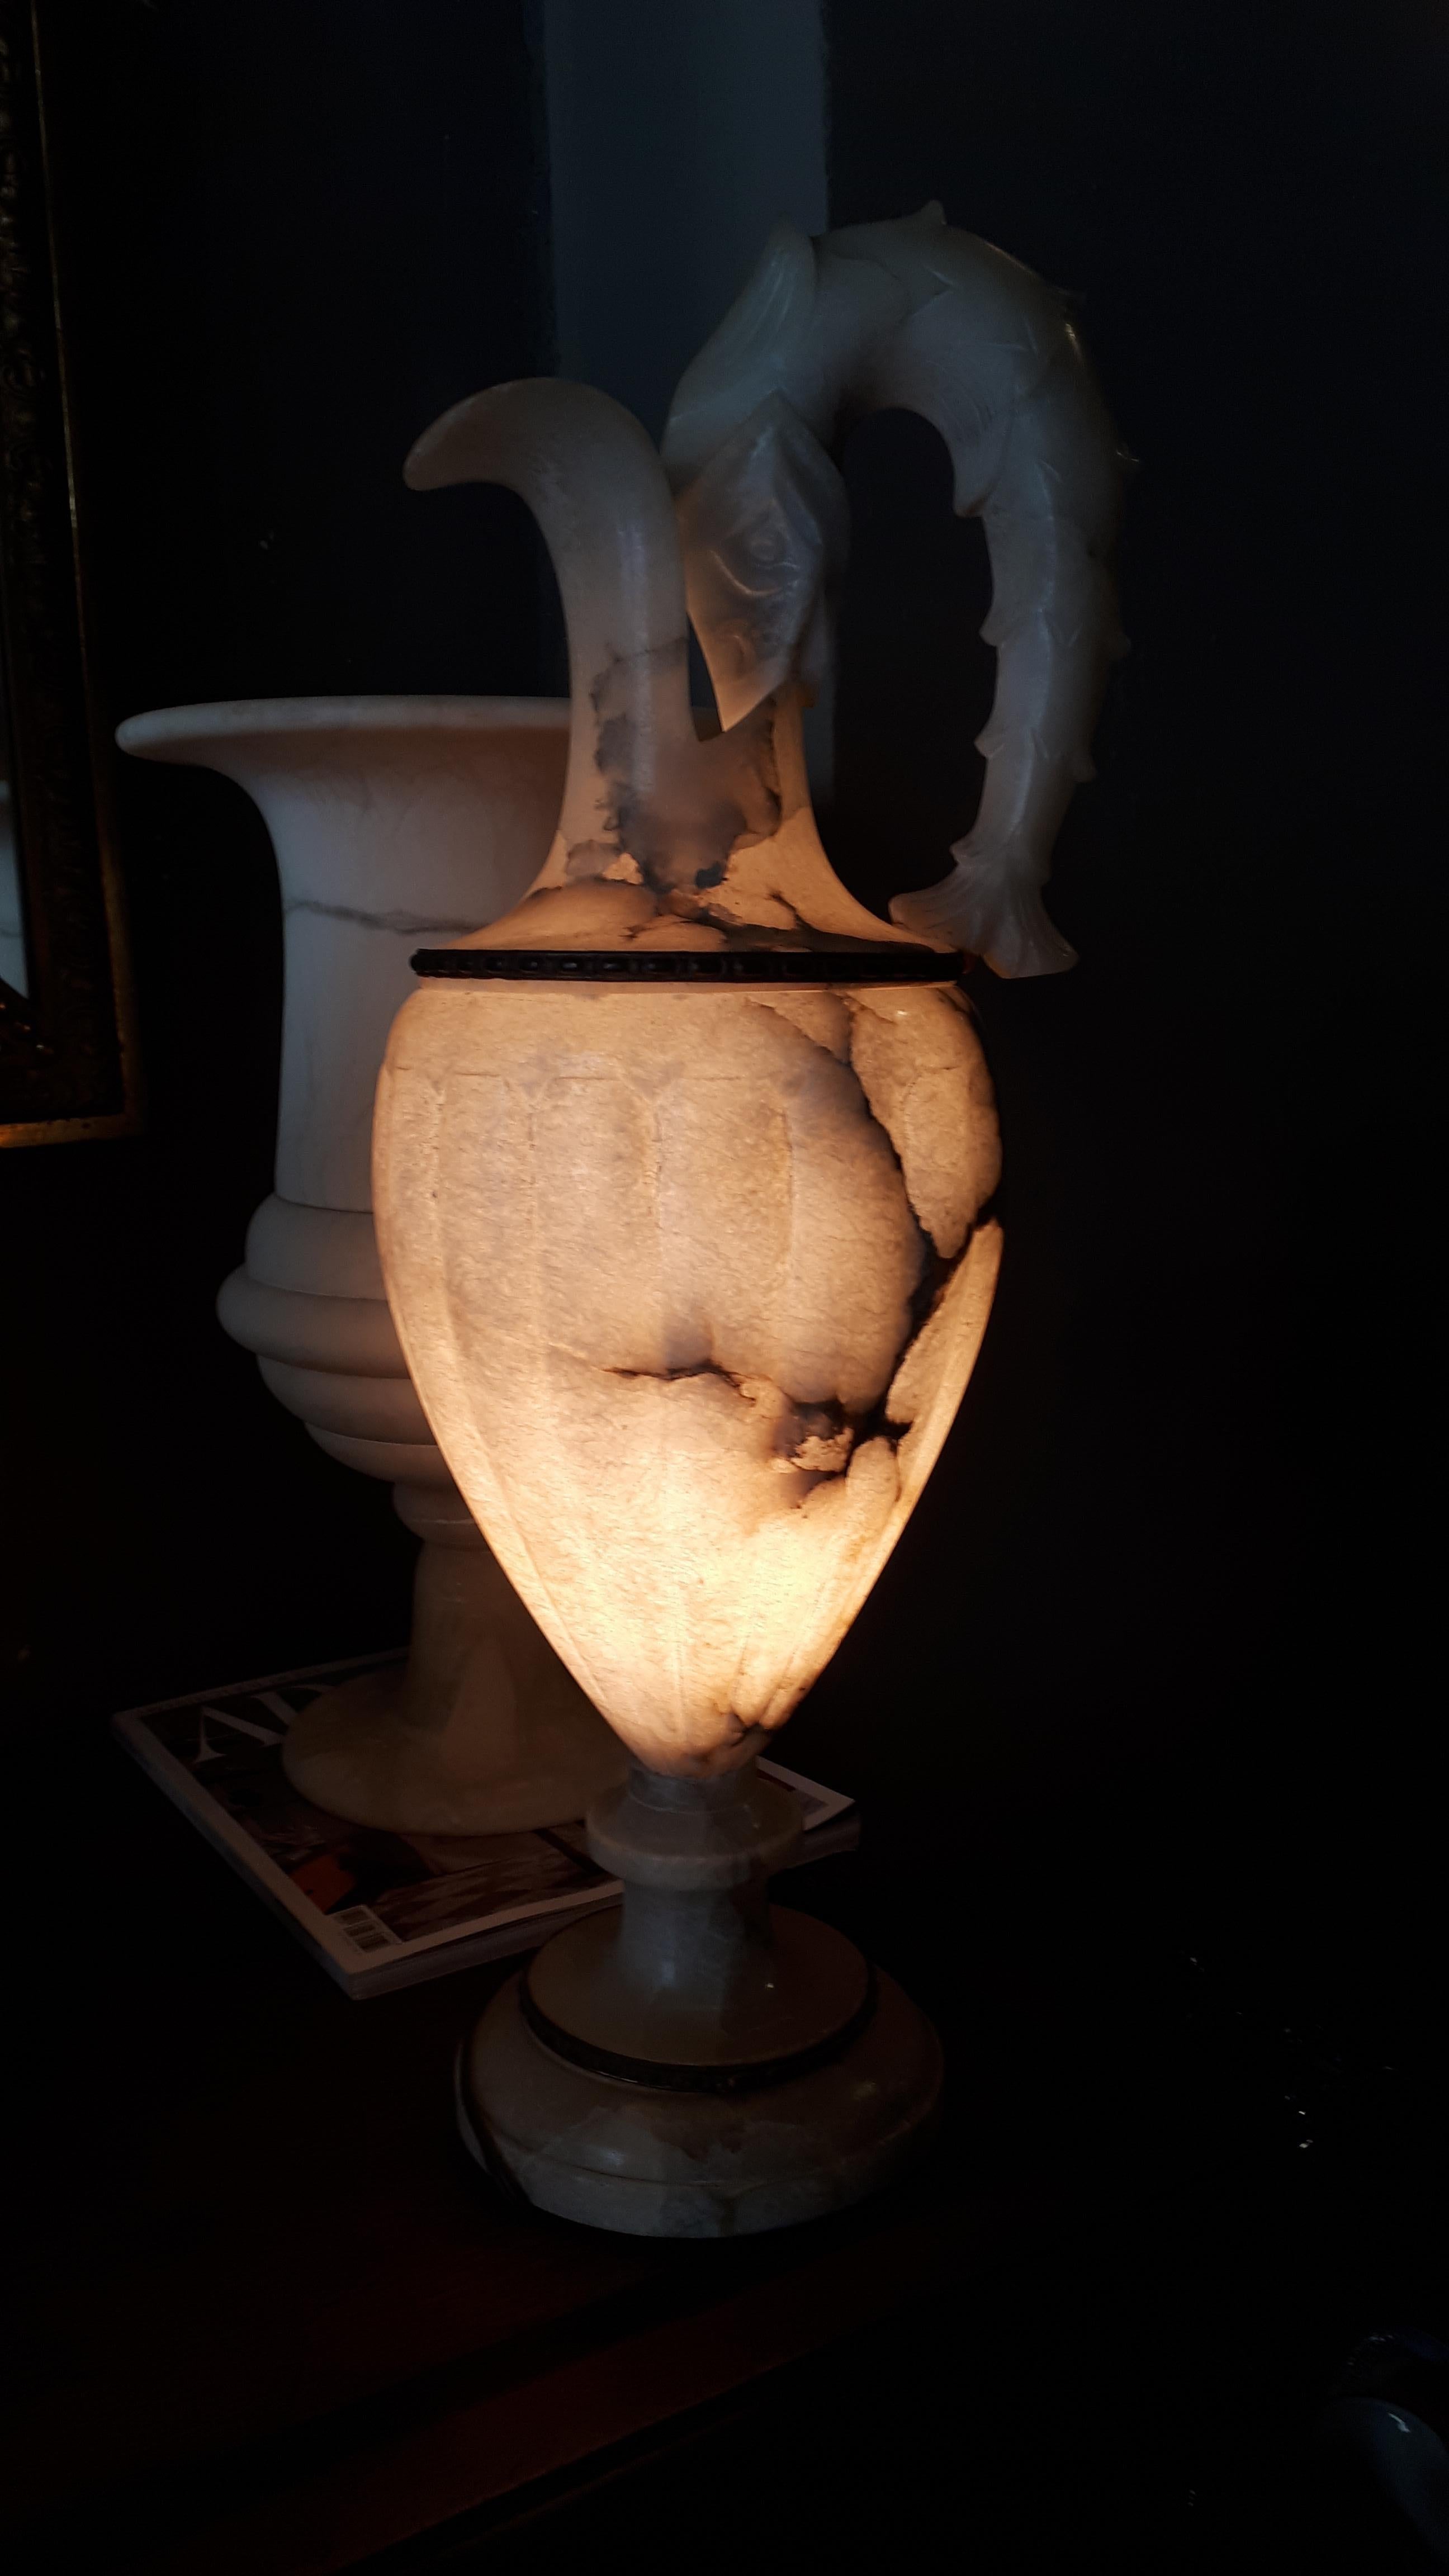 Urn Table Lamp with Jar design and carved Fish Handle and brass details. Spain, 1930s
Manufactured at the art deco period. It has an elegant neoclassical design. The carving fish as handle marks the difference in this piece.
This eye-catching